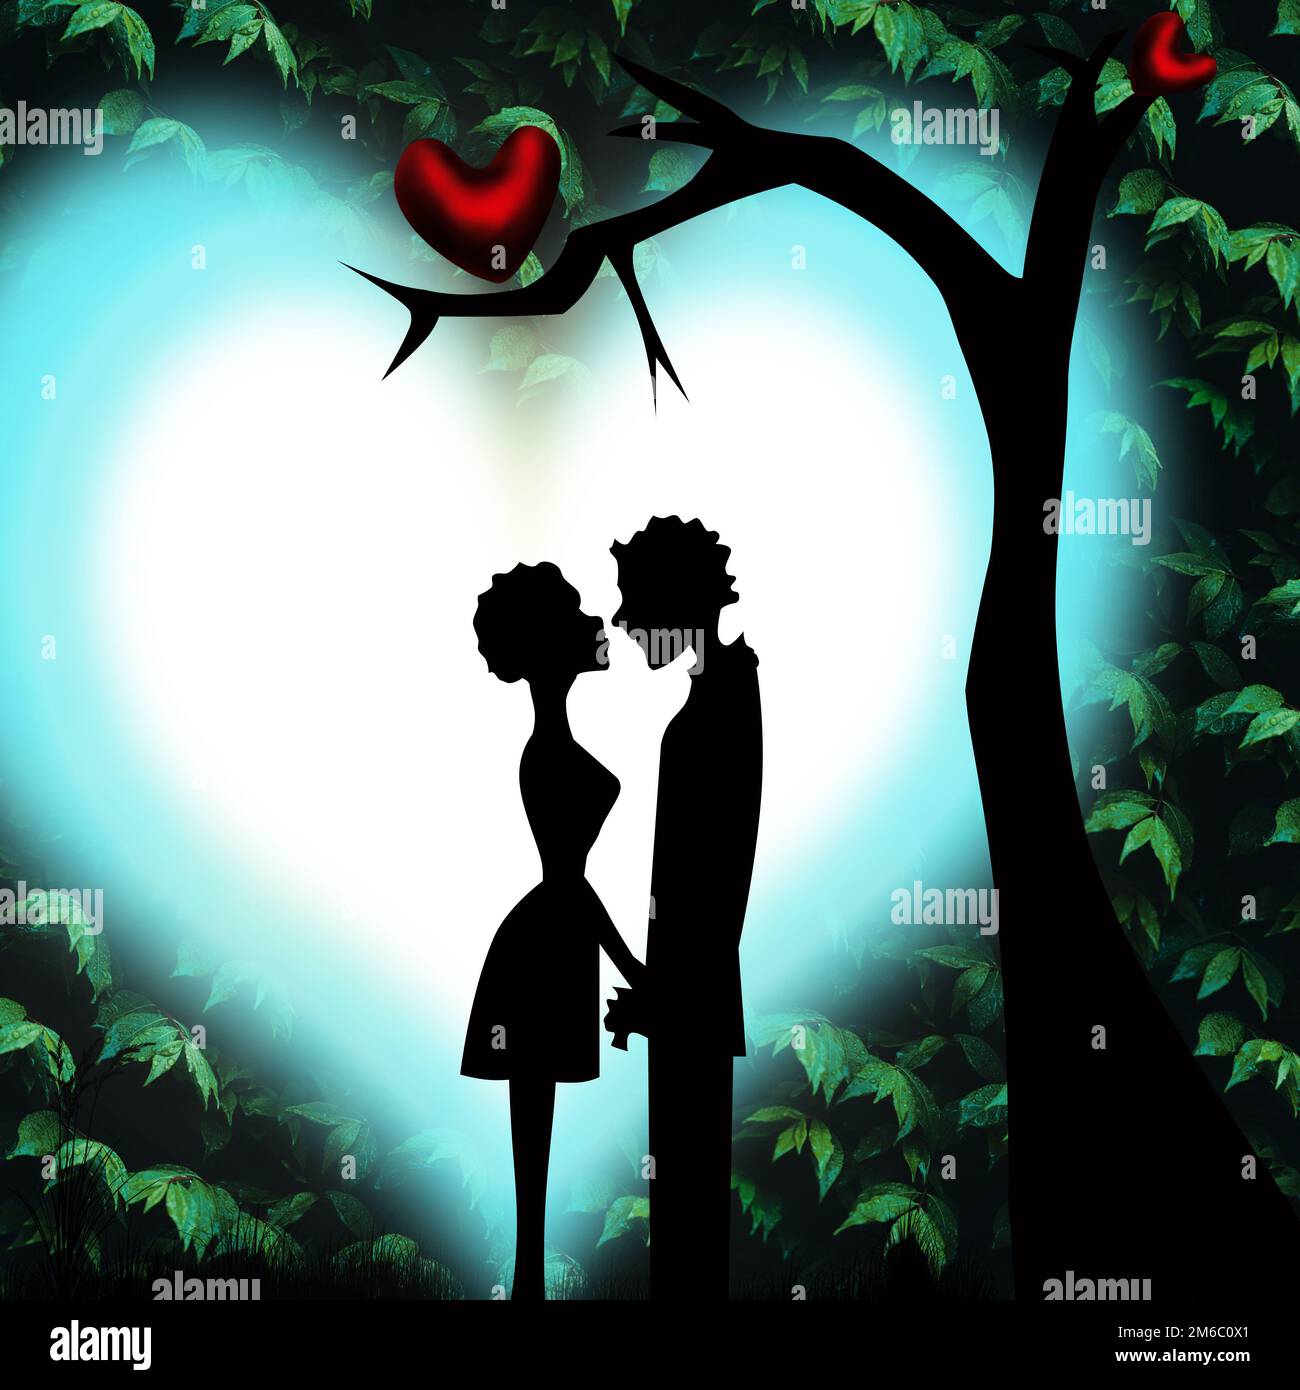 Illustration of Valentine's Day celebration greeting card with young loving couple silhouettes Stock Photo